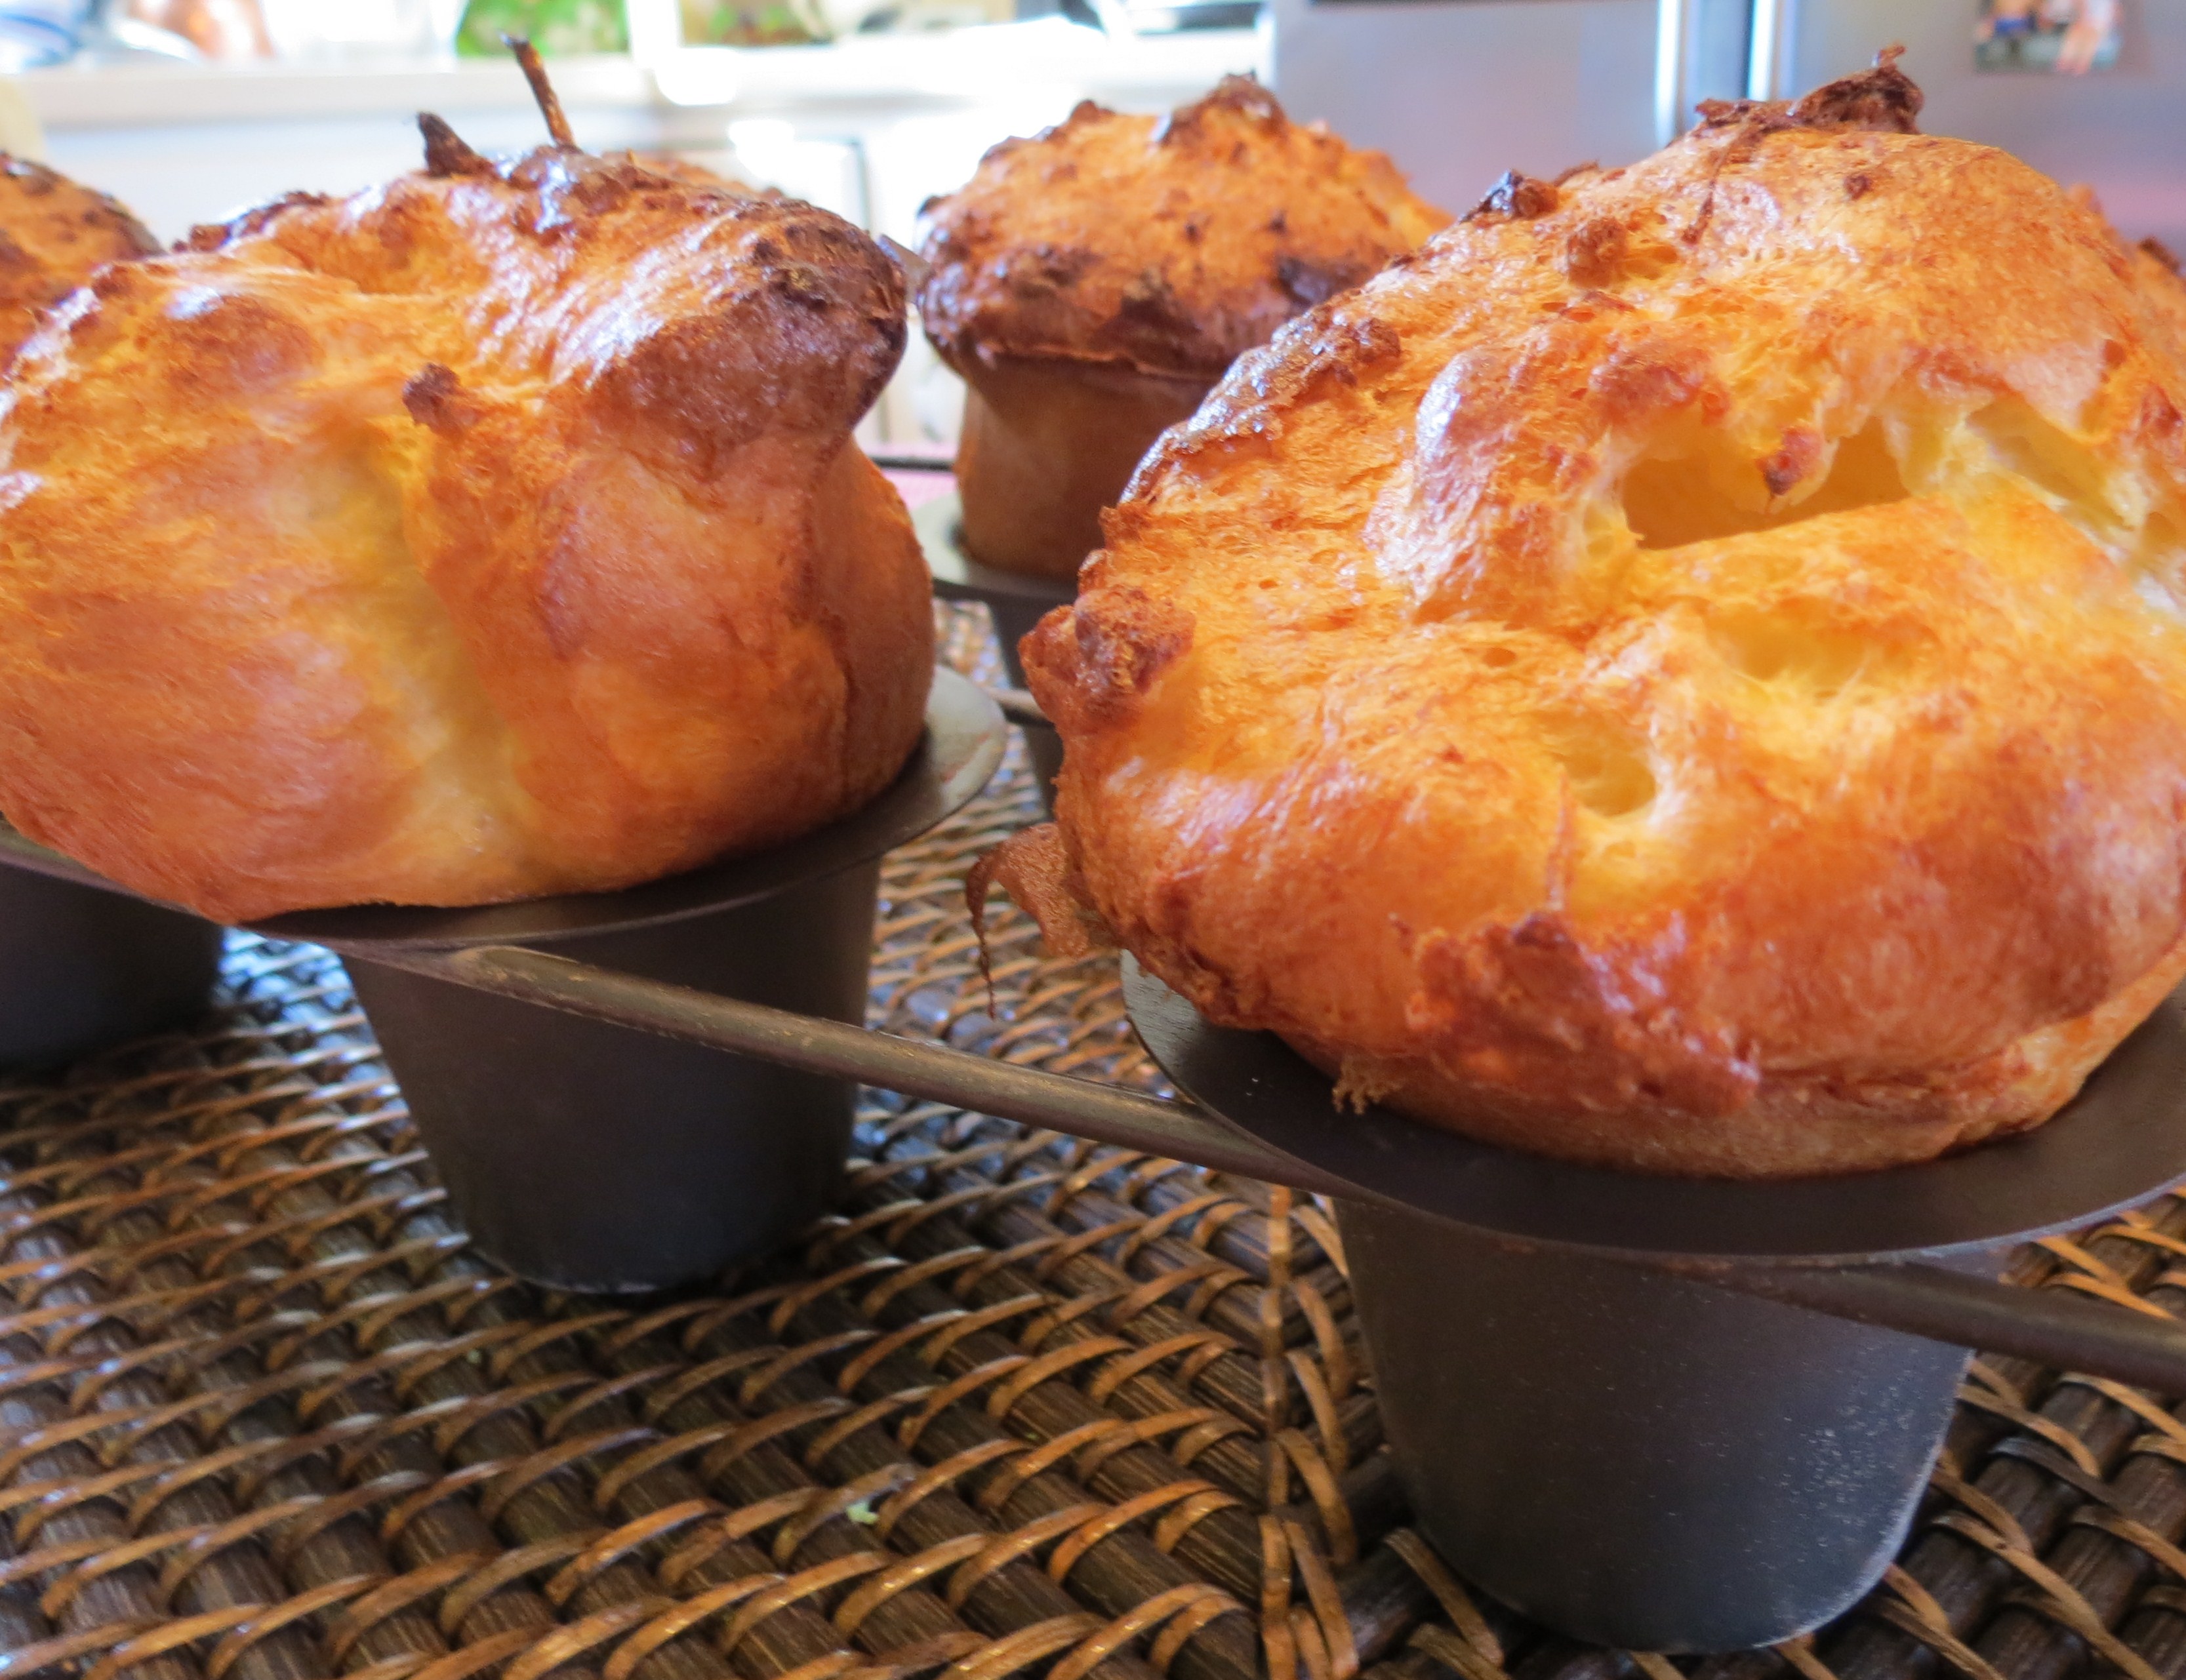 Do You Really Need A Special Pan To Make Popovers?